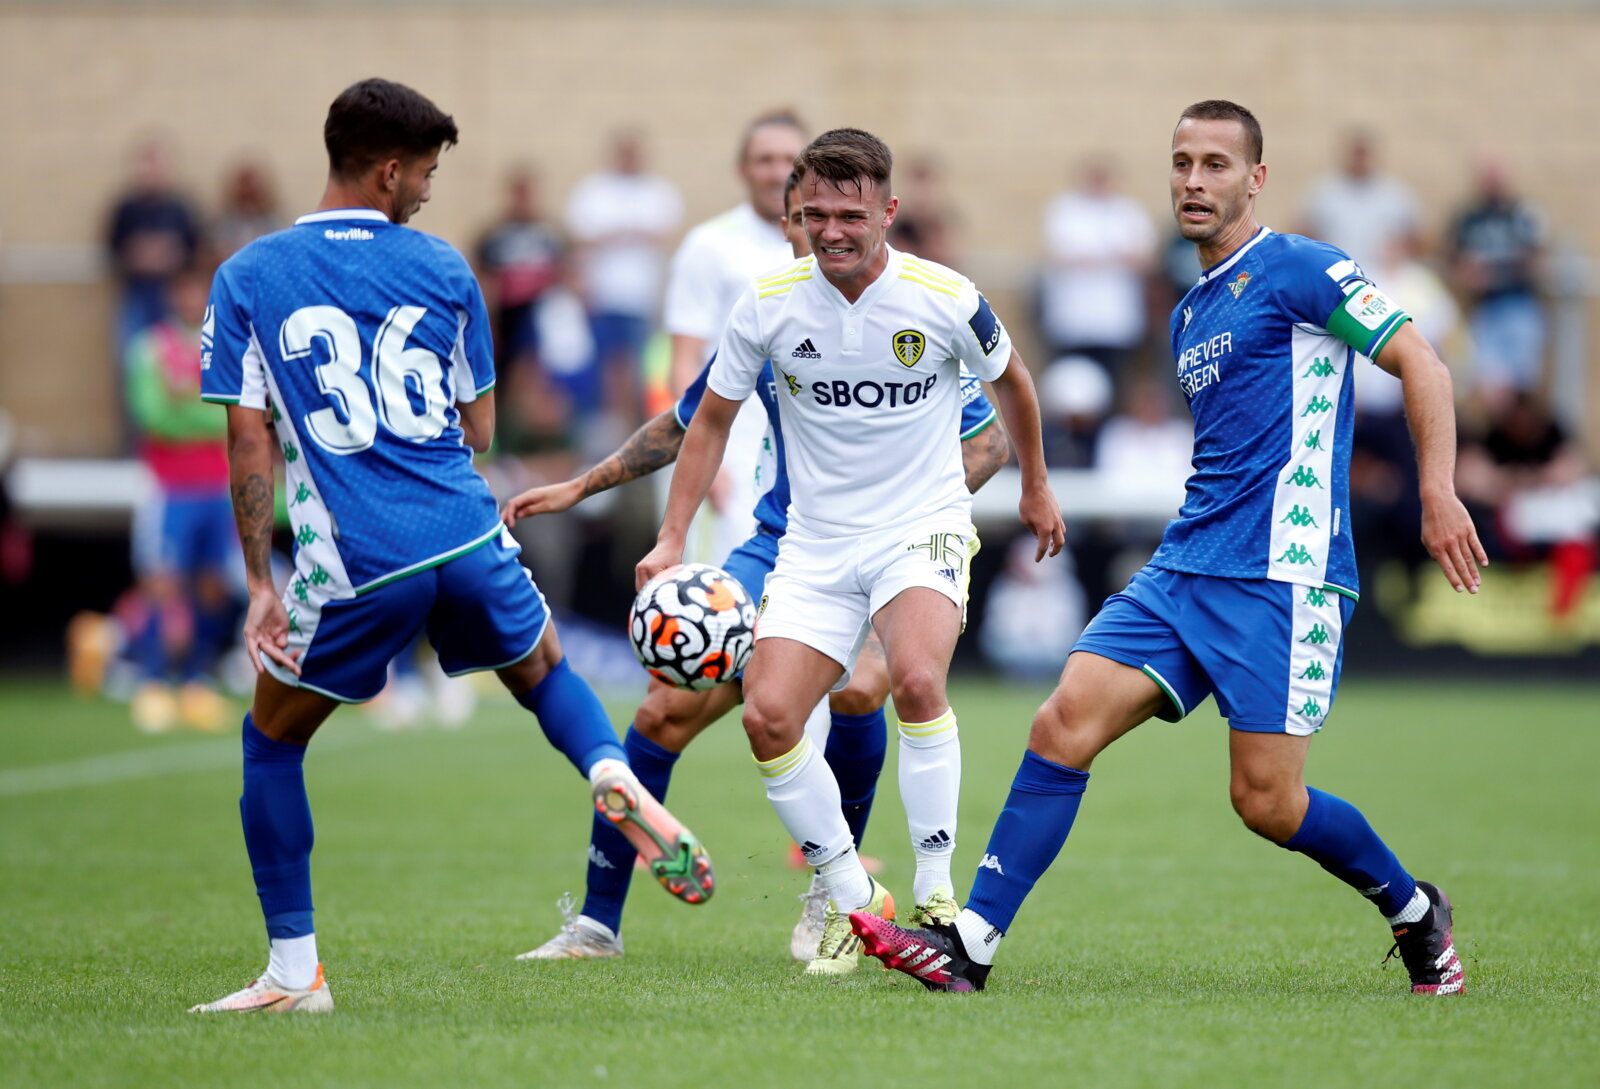 Soccer Football - Pre Season Friendly - Leeds United v Real Betis - Loughborough University Stadium, Loughborough, Britain - July 31, 2021 Leeds United's Jamie Shackleton in action with Real Betis' Sergio Canales  Action Images via Reuters/Ed Sykes